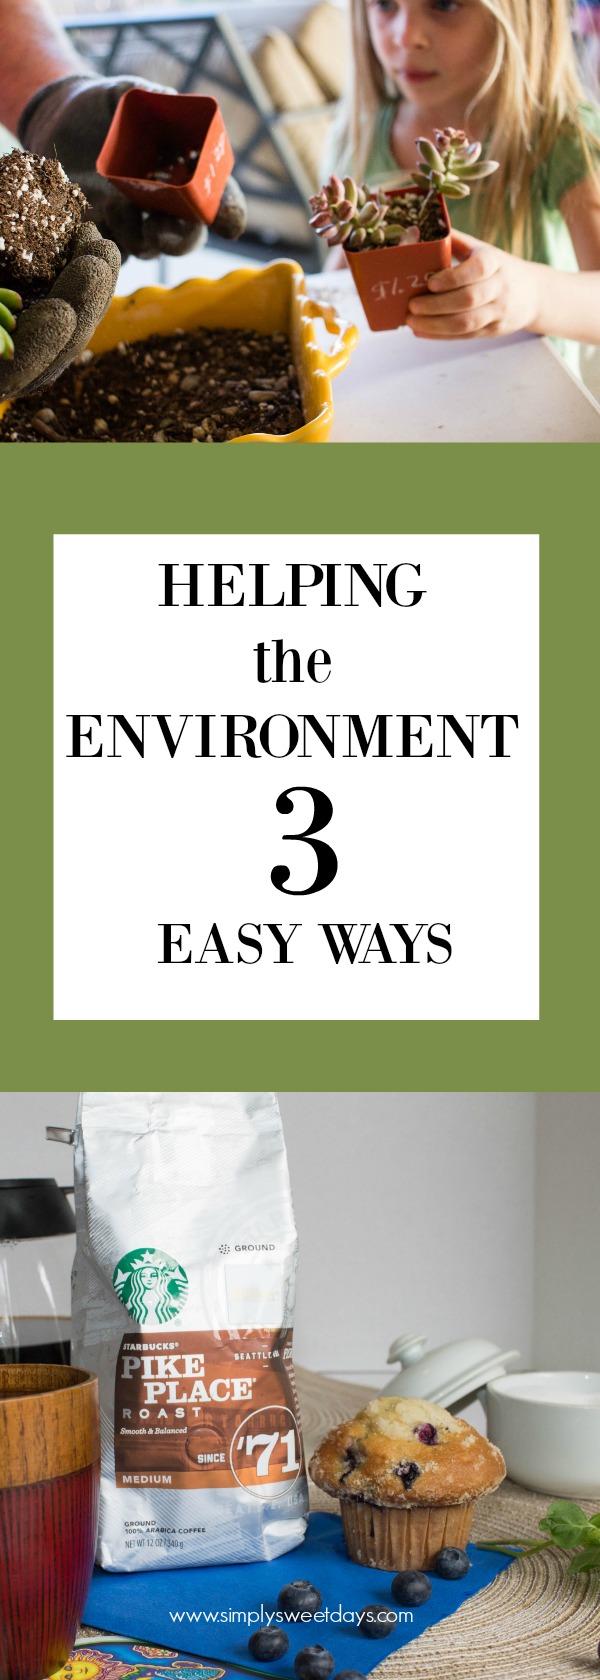 Want to help your kids take care of the environment but there’s not enough time? Check out these 3 easy ways to help the environment. They’re budget-friendly too!